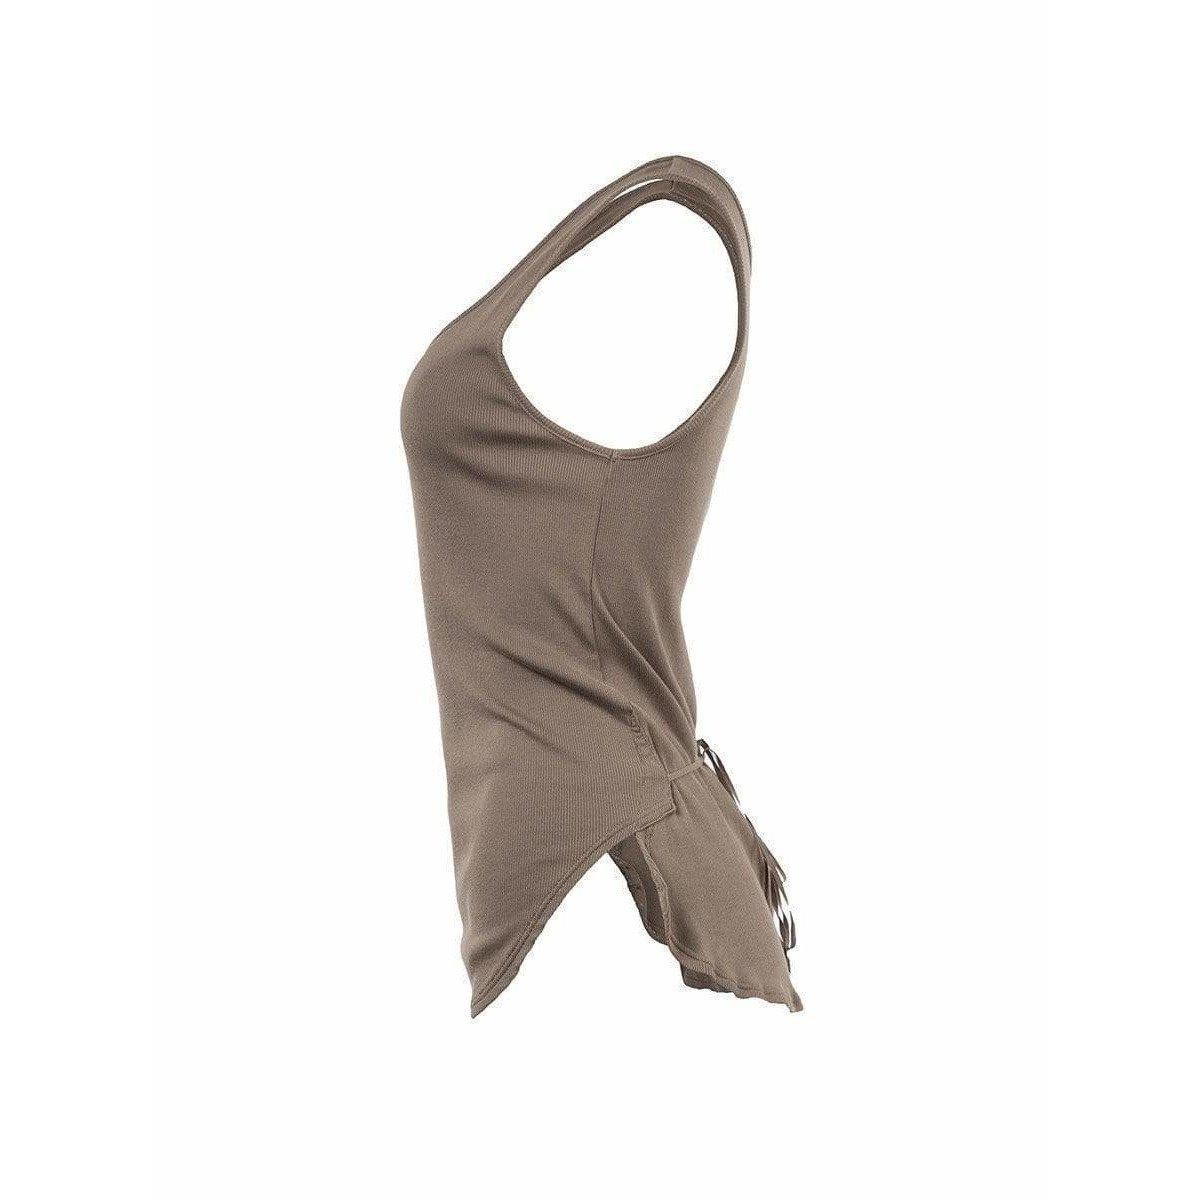 This soft mocha colored ribbed cotton tank comes from vintage Undercover. The cotton top has a bit of an apron feel, with self ties that wrap around to tie in back, creating a more personalized, fitted feel.